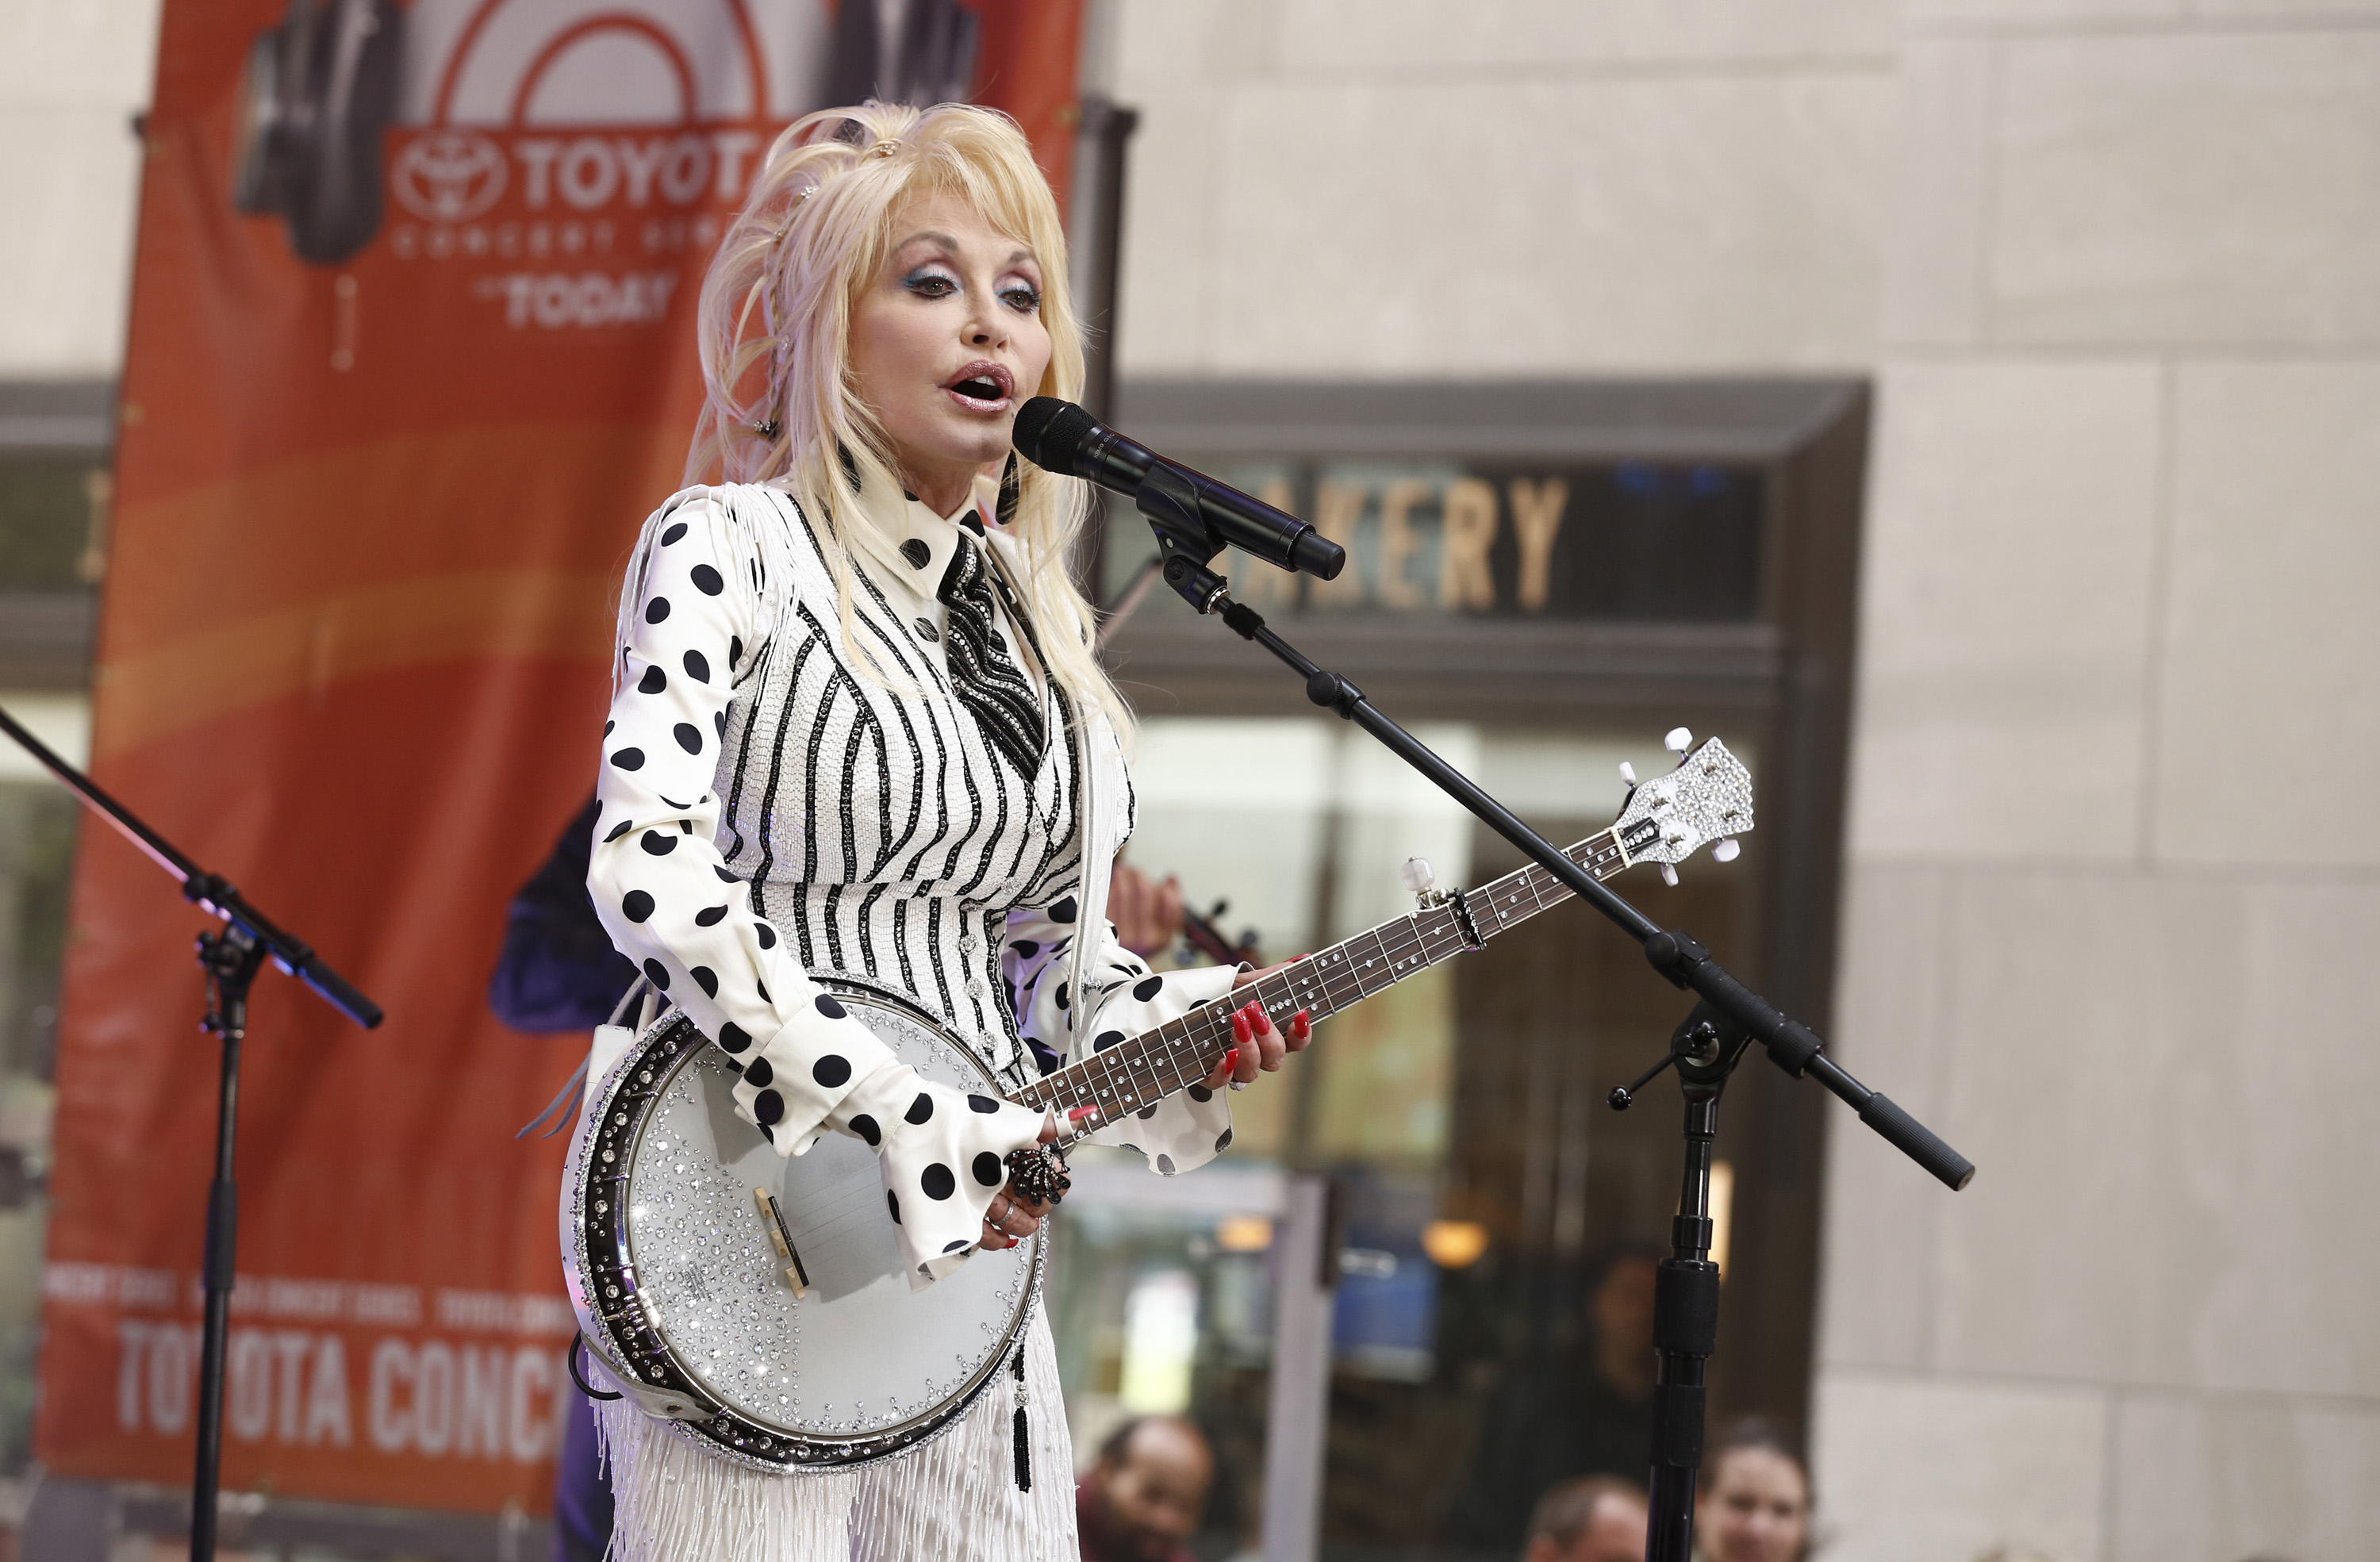 Dolly Parton performing on the 'Today' Show. She's singing into a microphone while playing a white banjo.